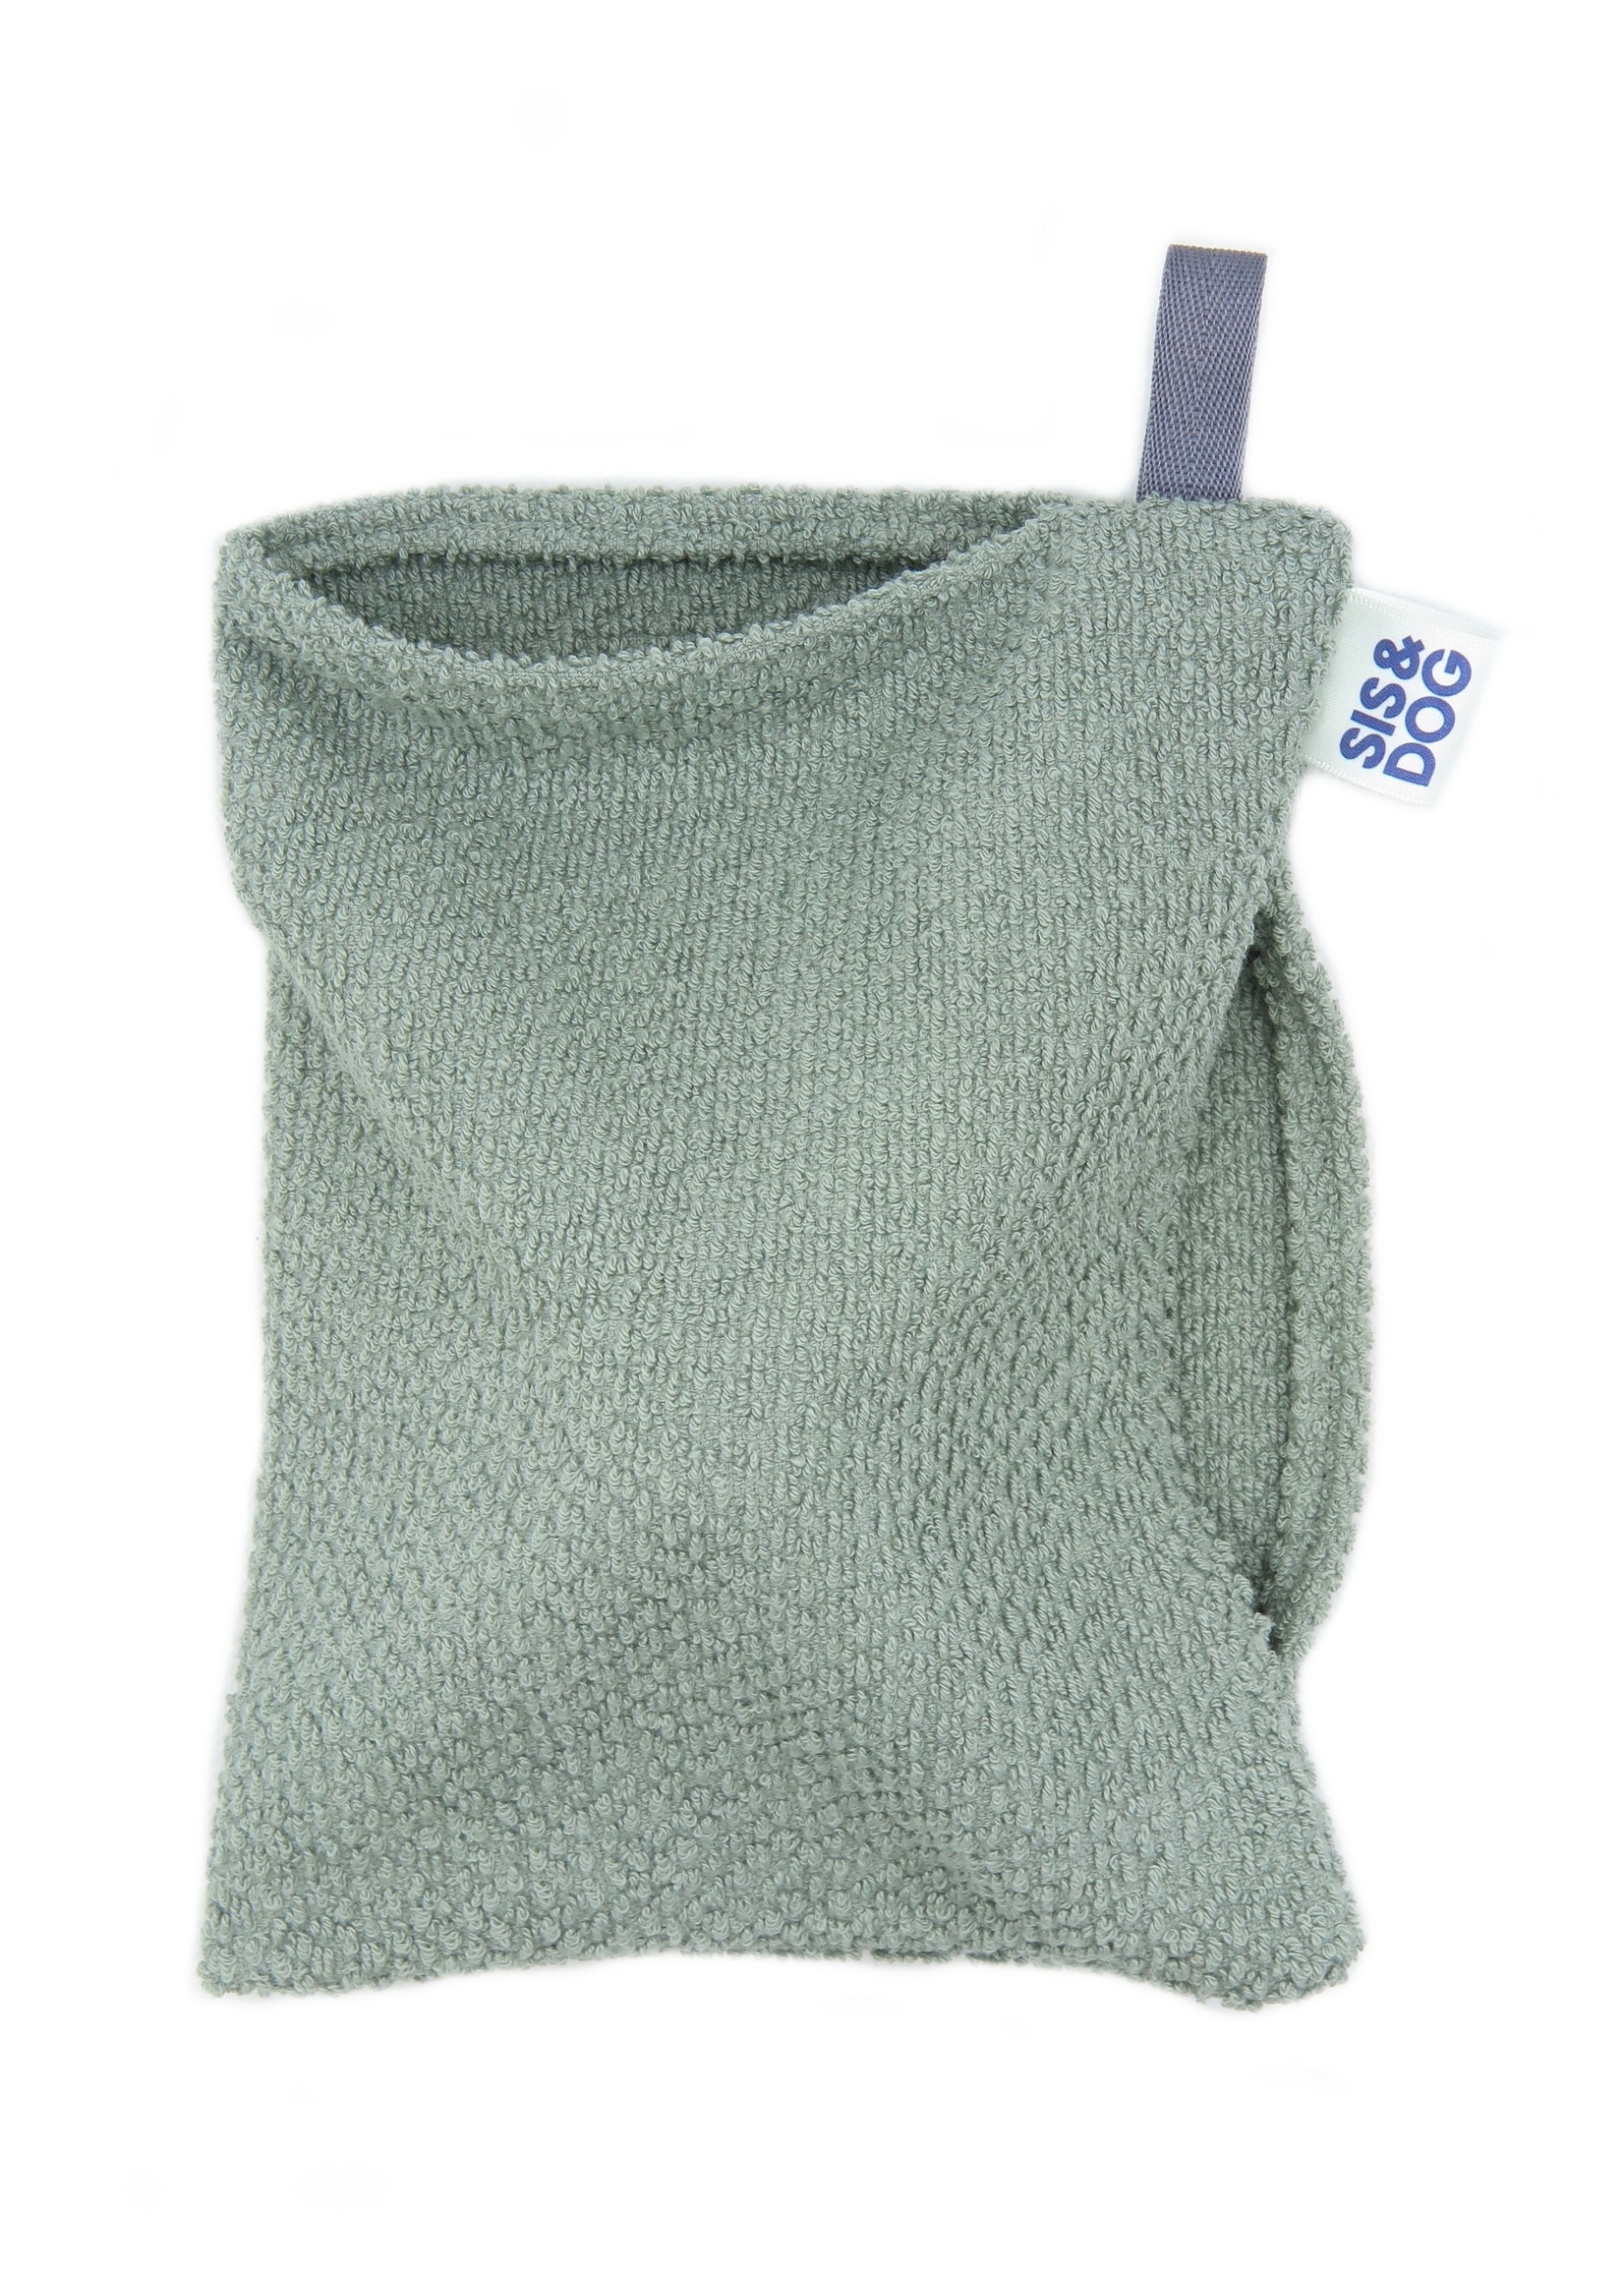 Paw towel old green